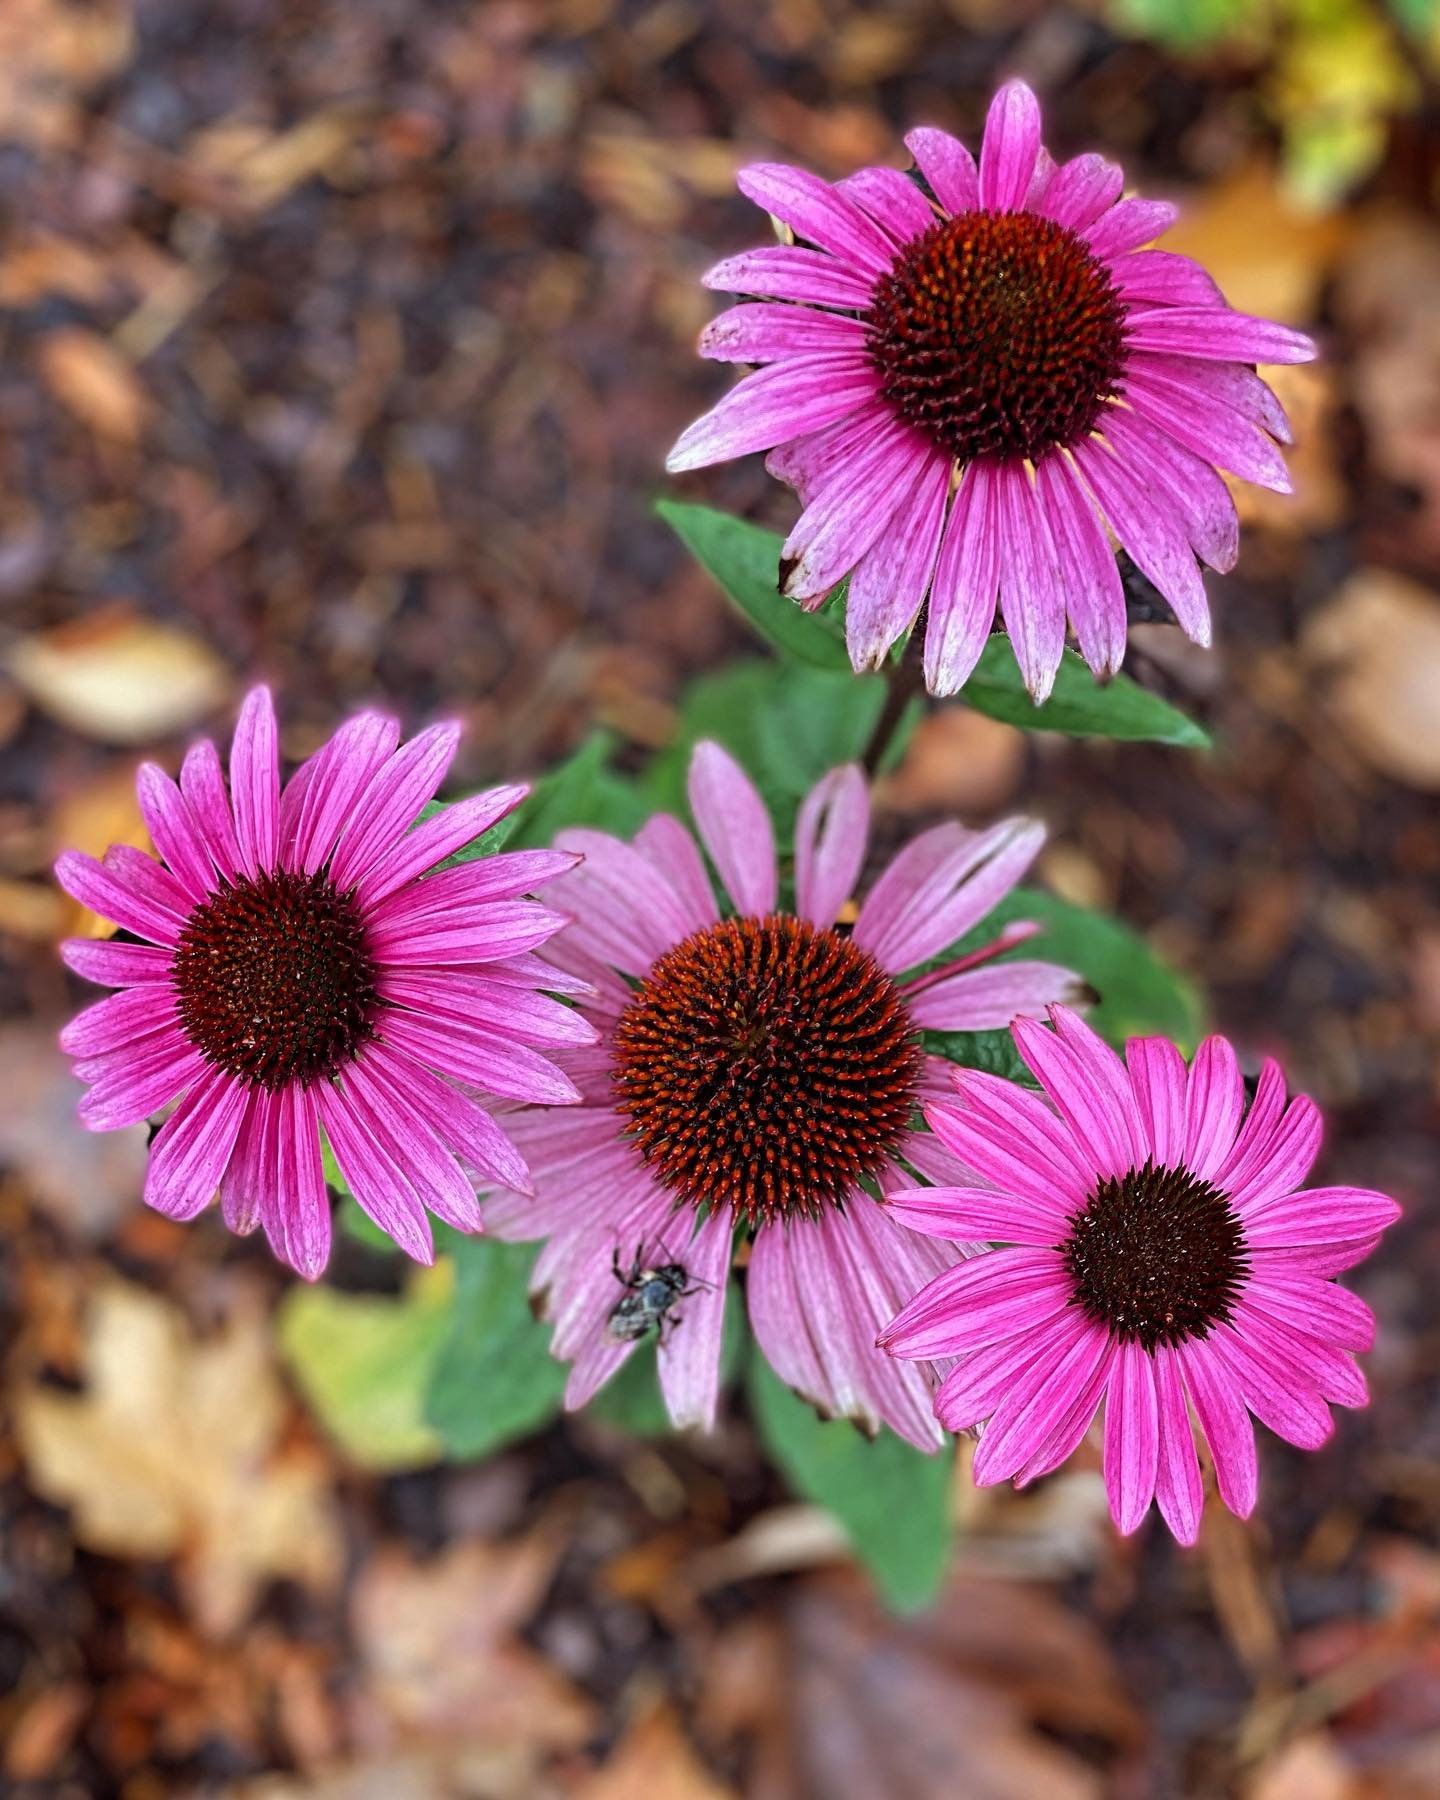 we&rsquo;ve turned the seasonal corner &amp; are officially preparing our gardens for winter. we like to leave coneflower heads &amp; other seed heads up for our local critters to munch on during the colder months. 🐦